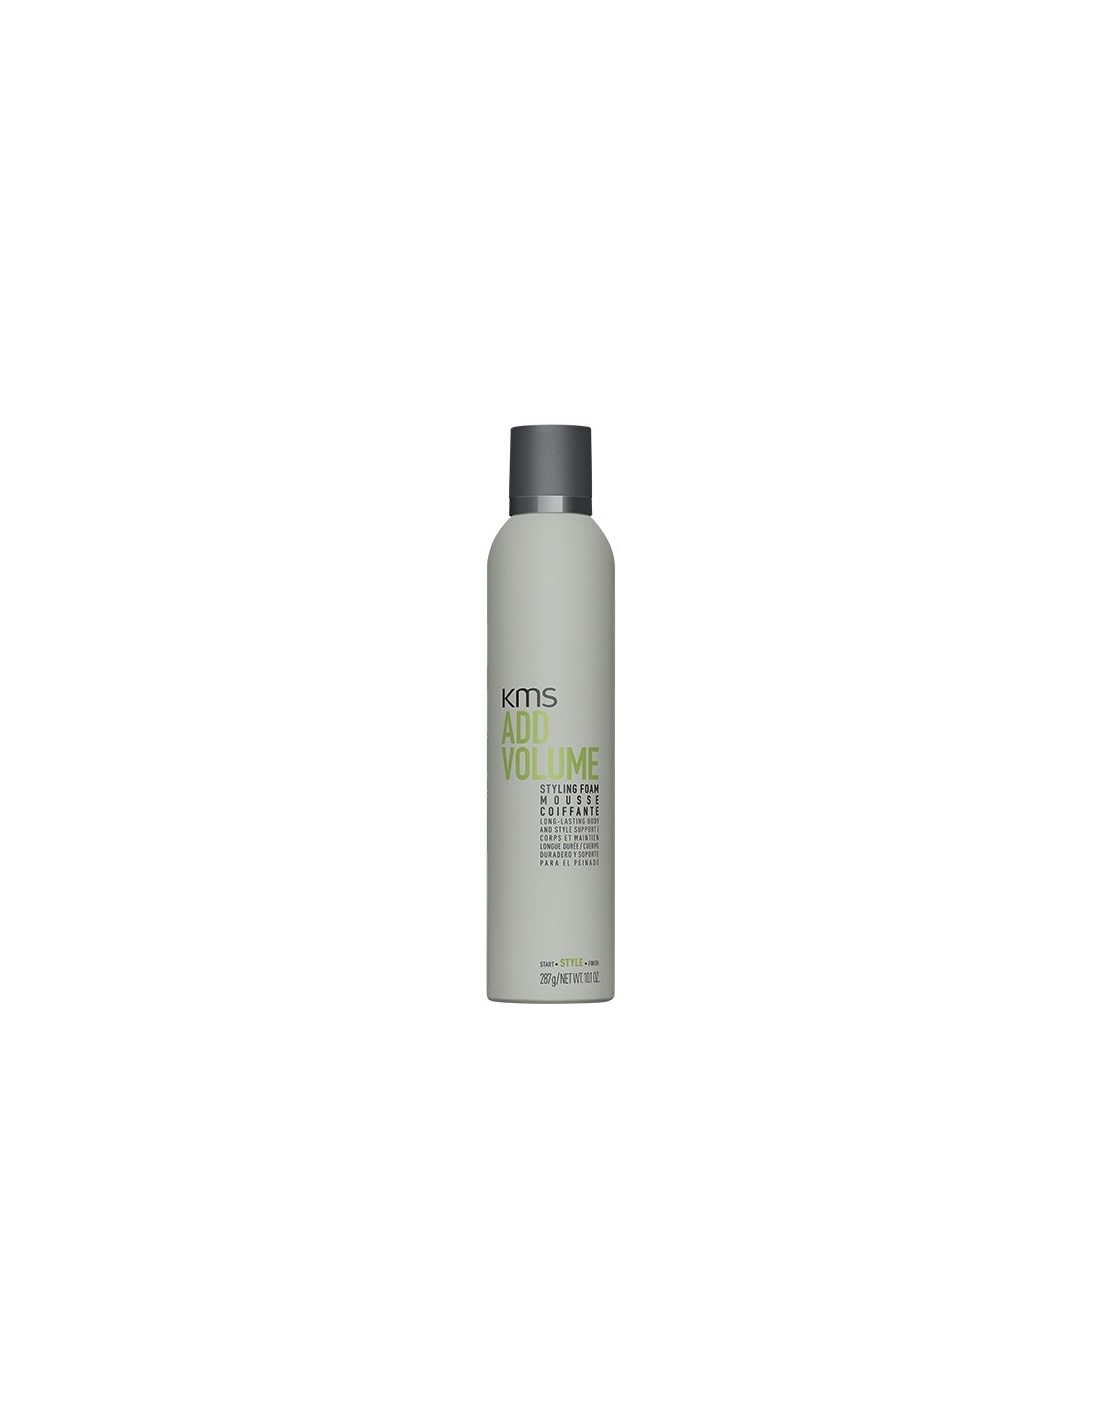 KMS  ADD VOLUME Styling Foam - Industria Coiffure Hair Products